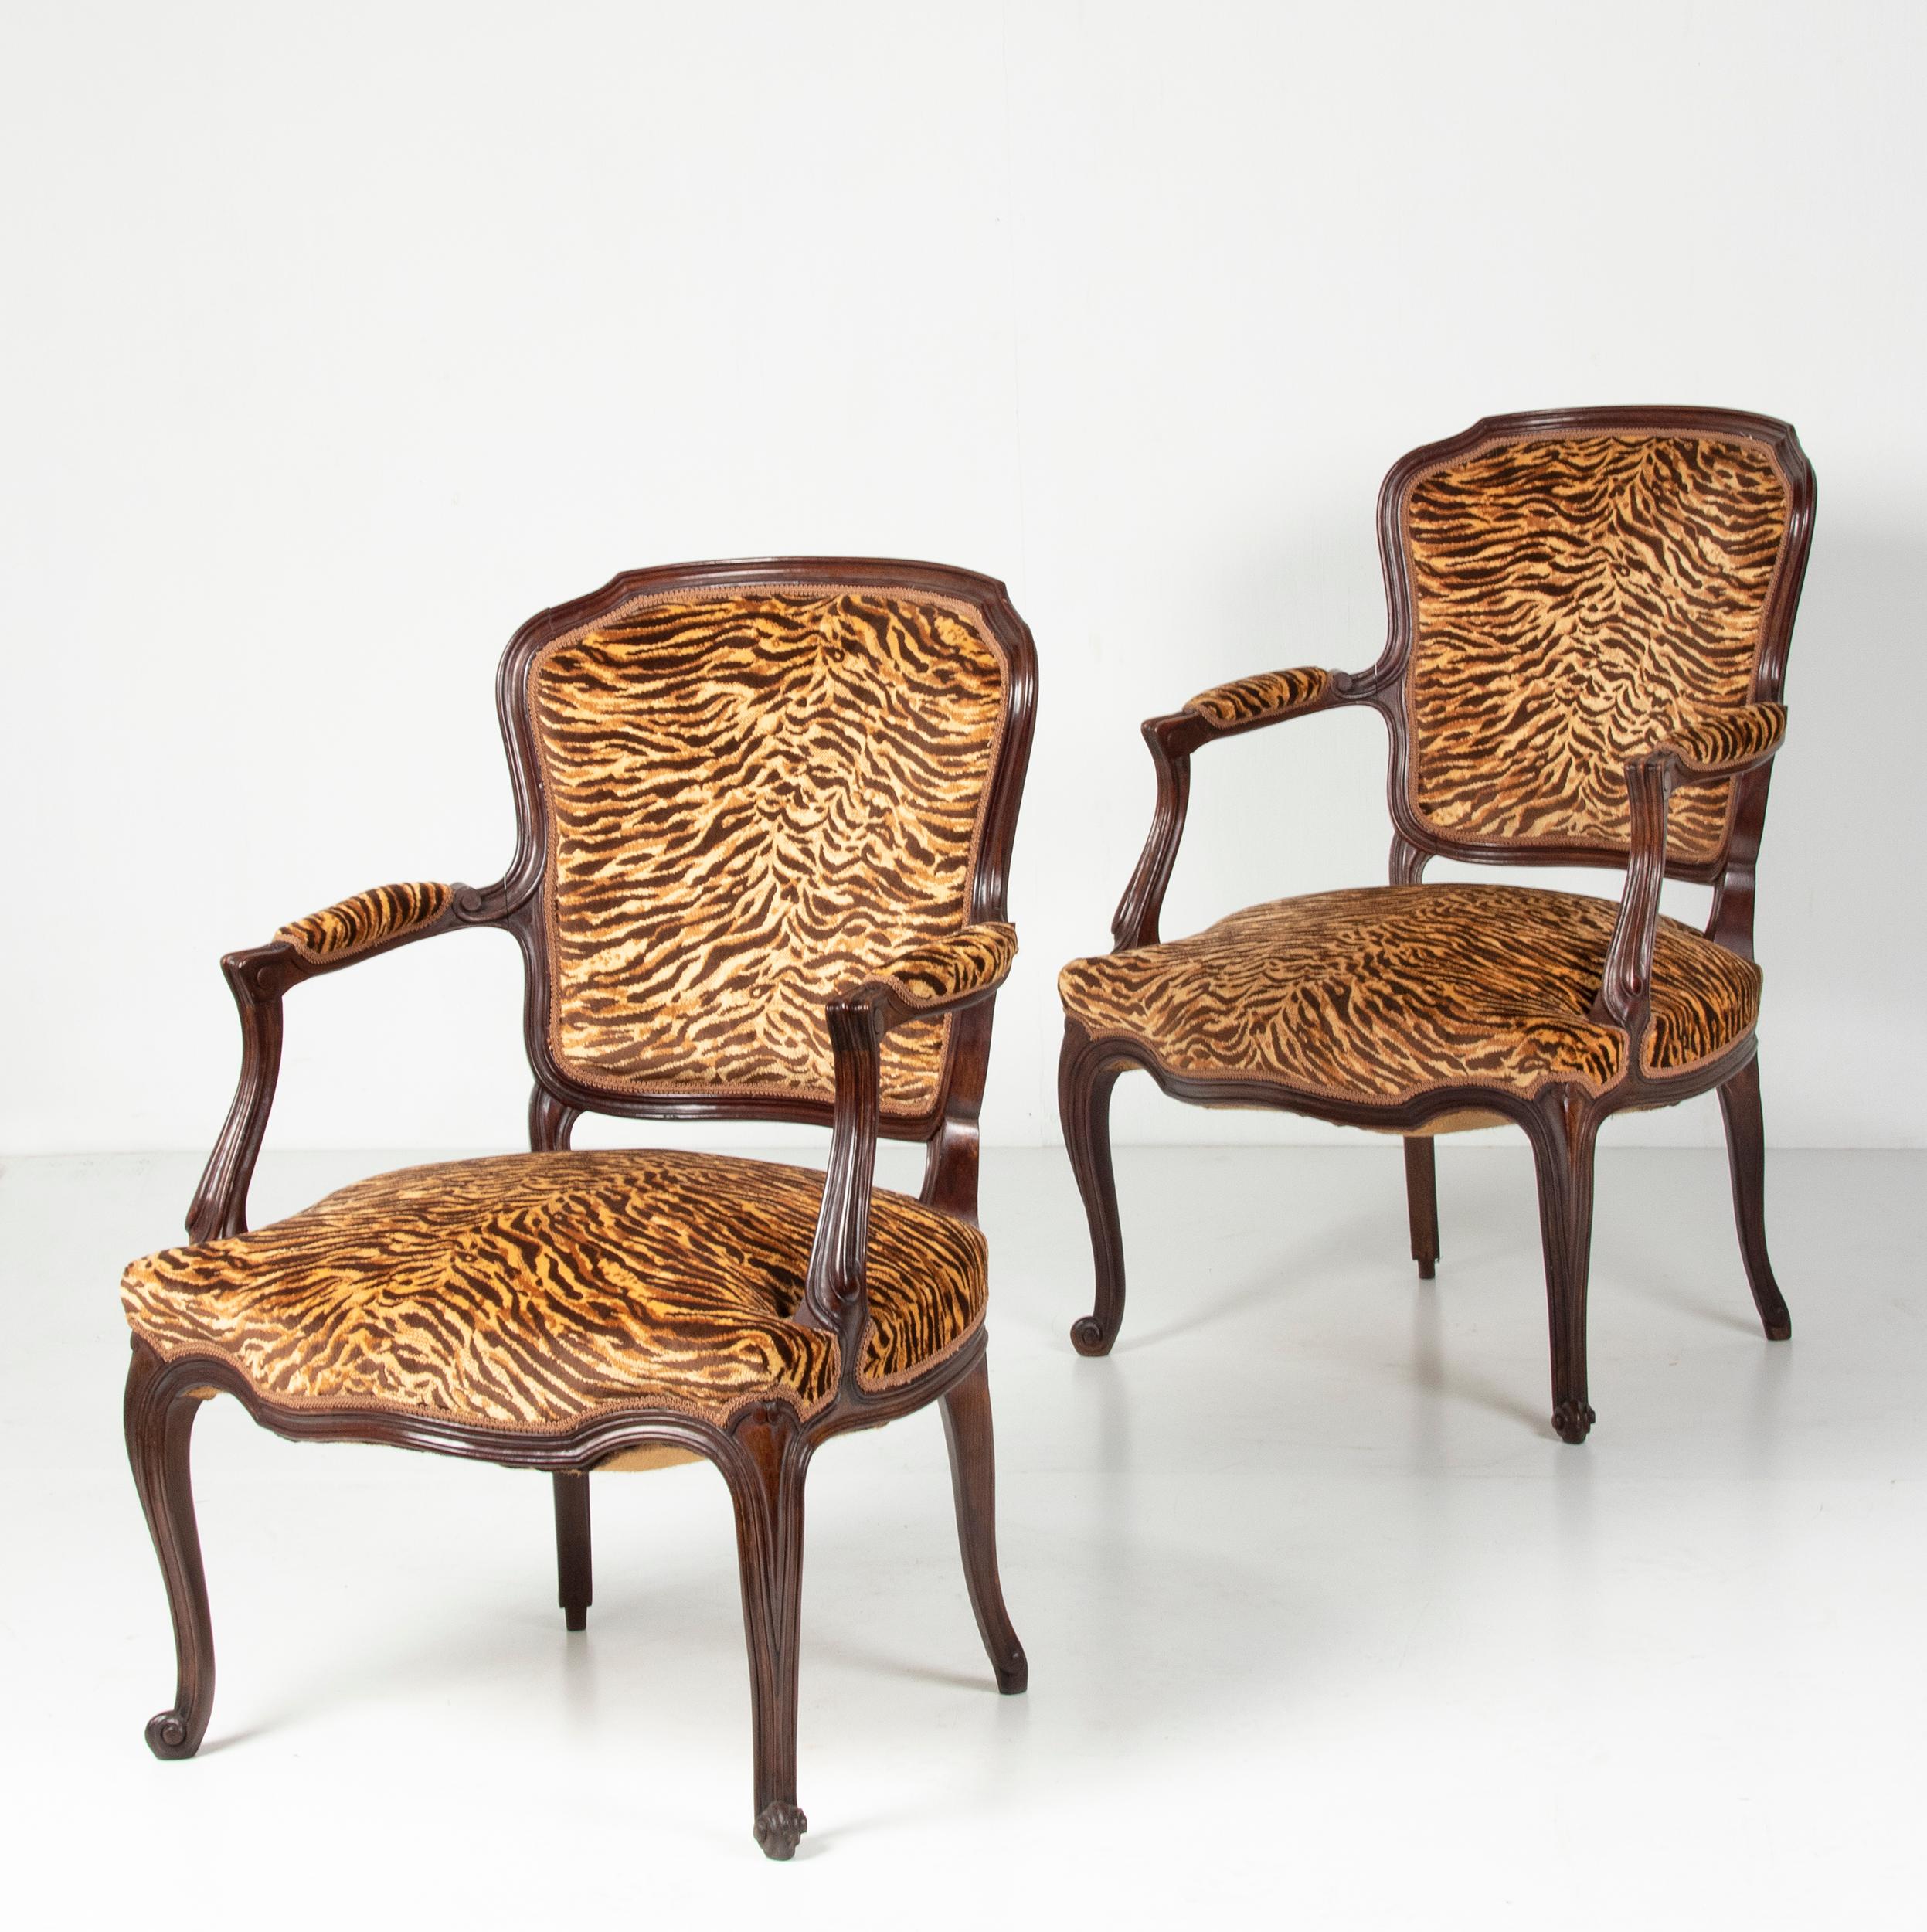 Hand-Crafted Pair of Early 20th Century French Cabriolet Arm Chairs with Tiger Print Fabric